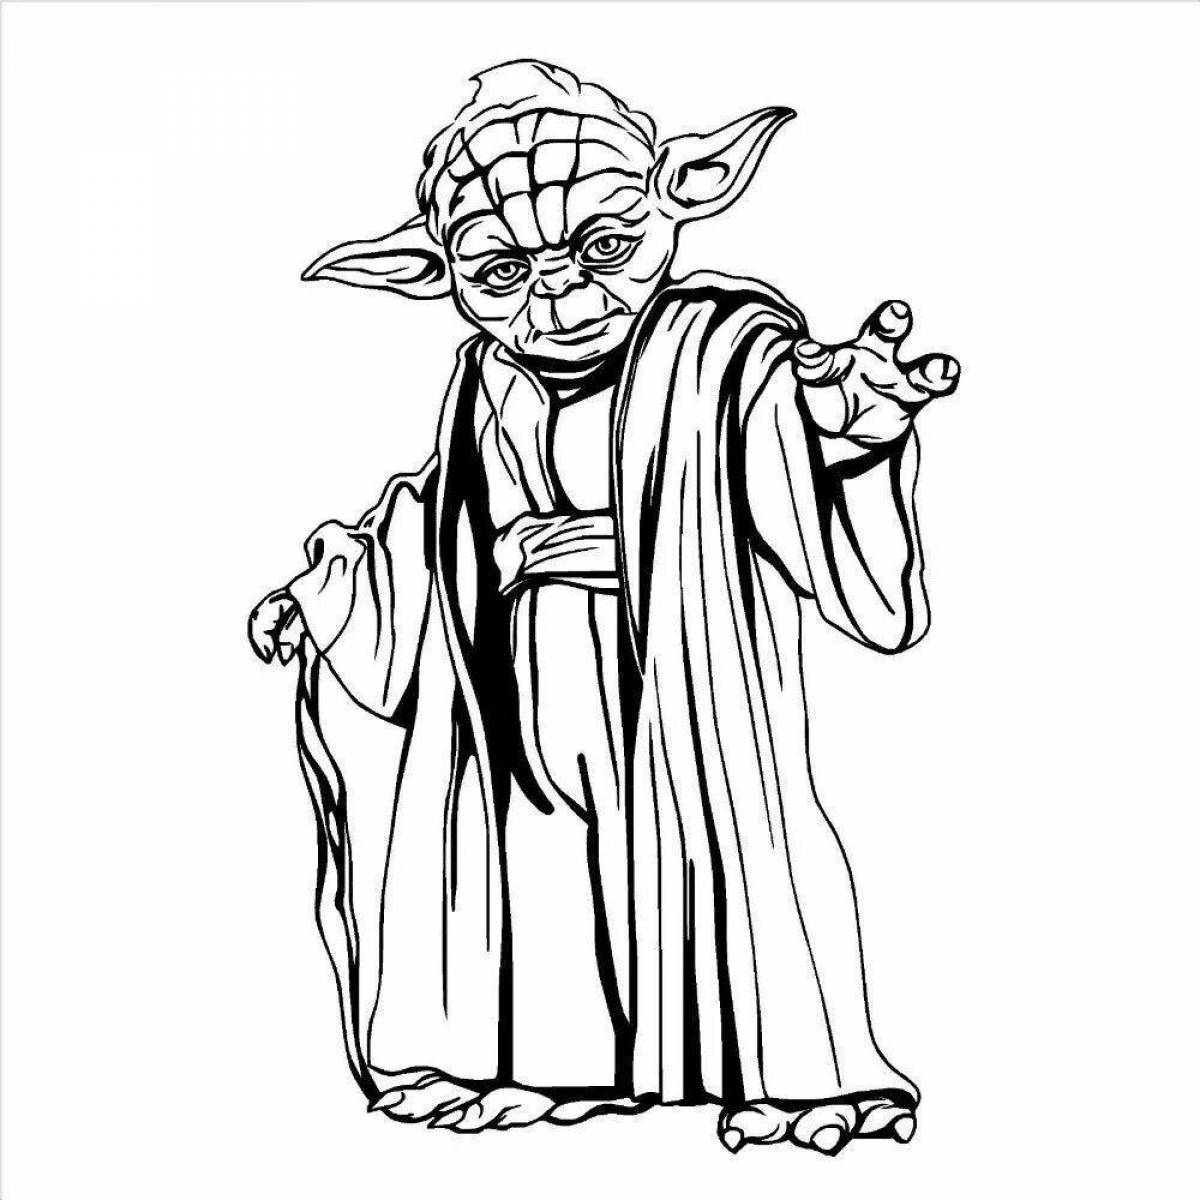 Artistically created master yoda coloring page